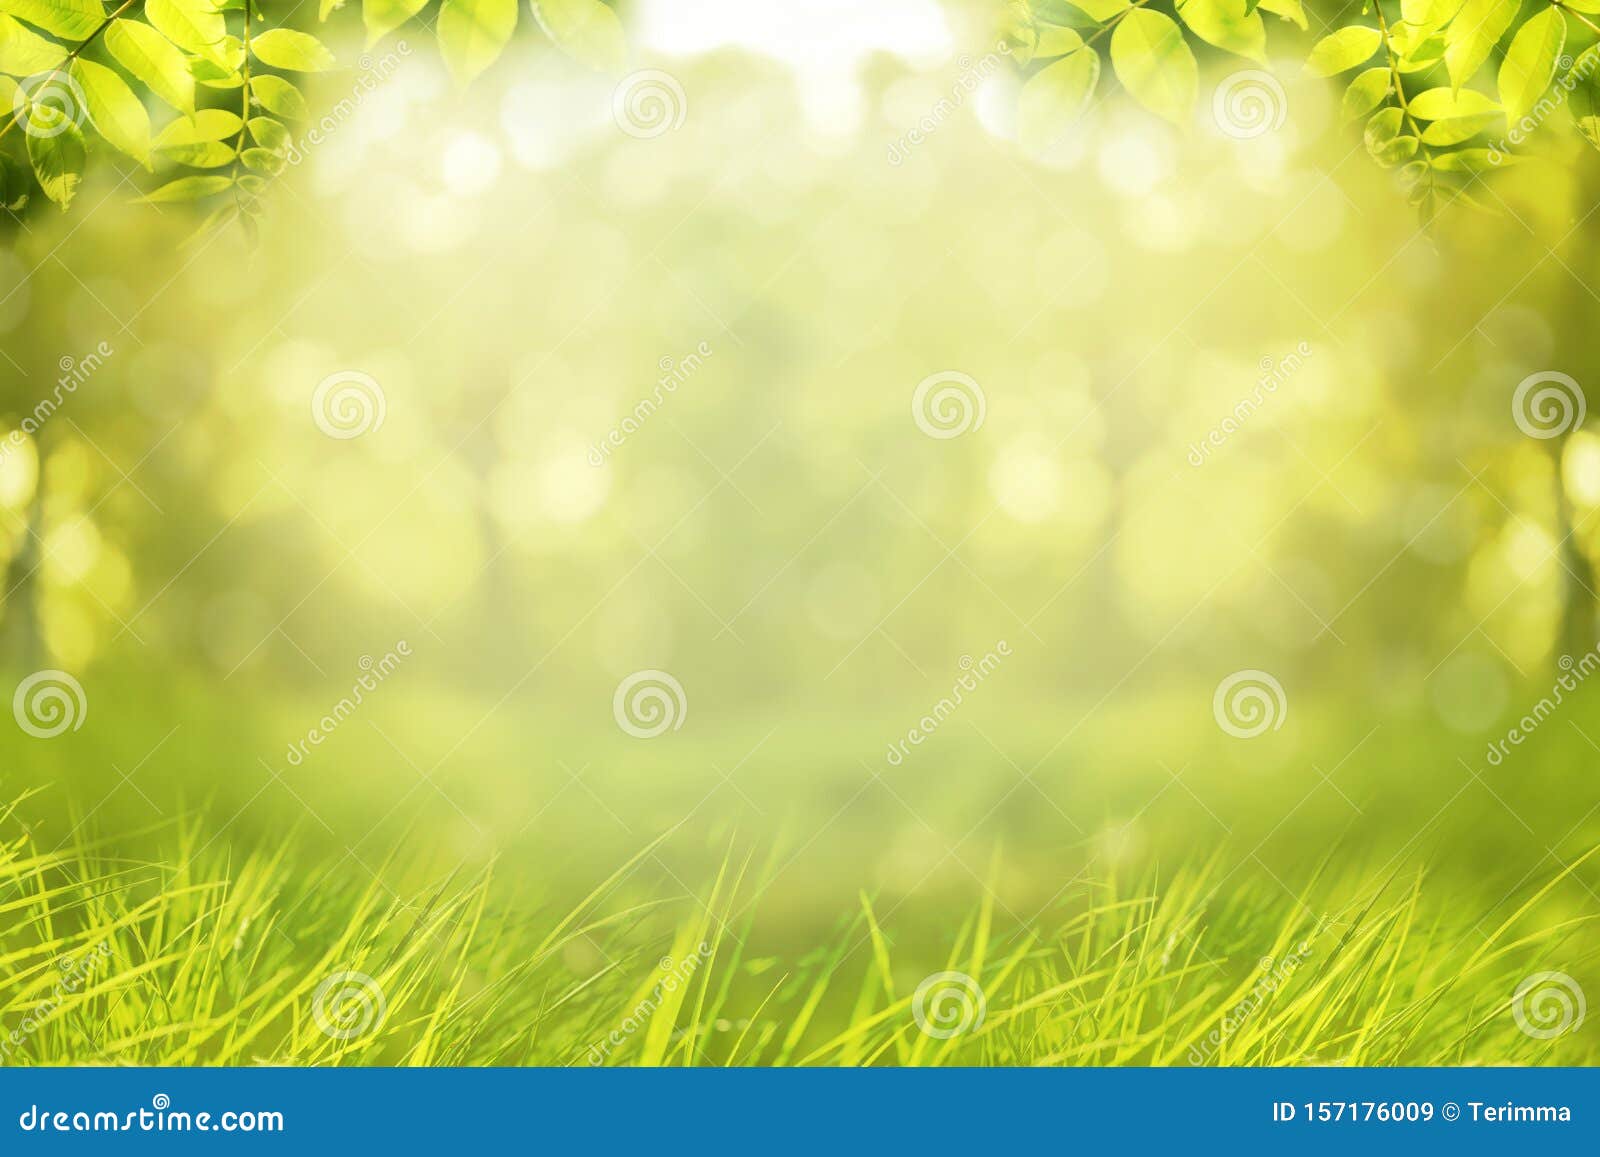 Nature Background, Frame of Tree Leave and Green Grass Stock Image ...